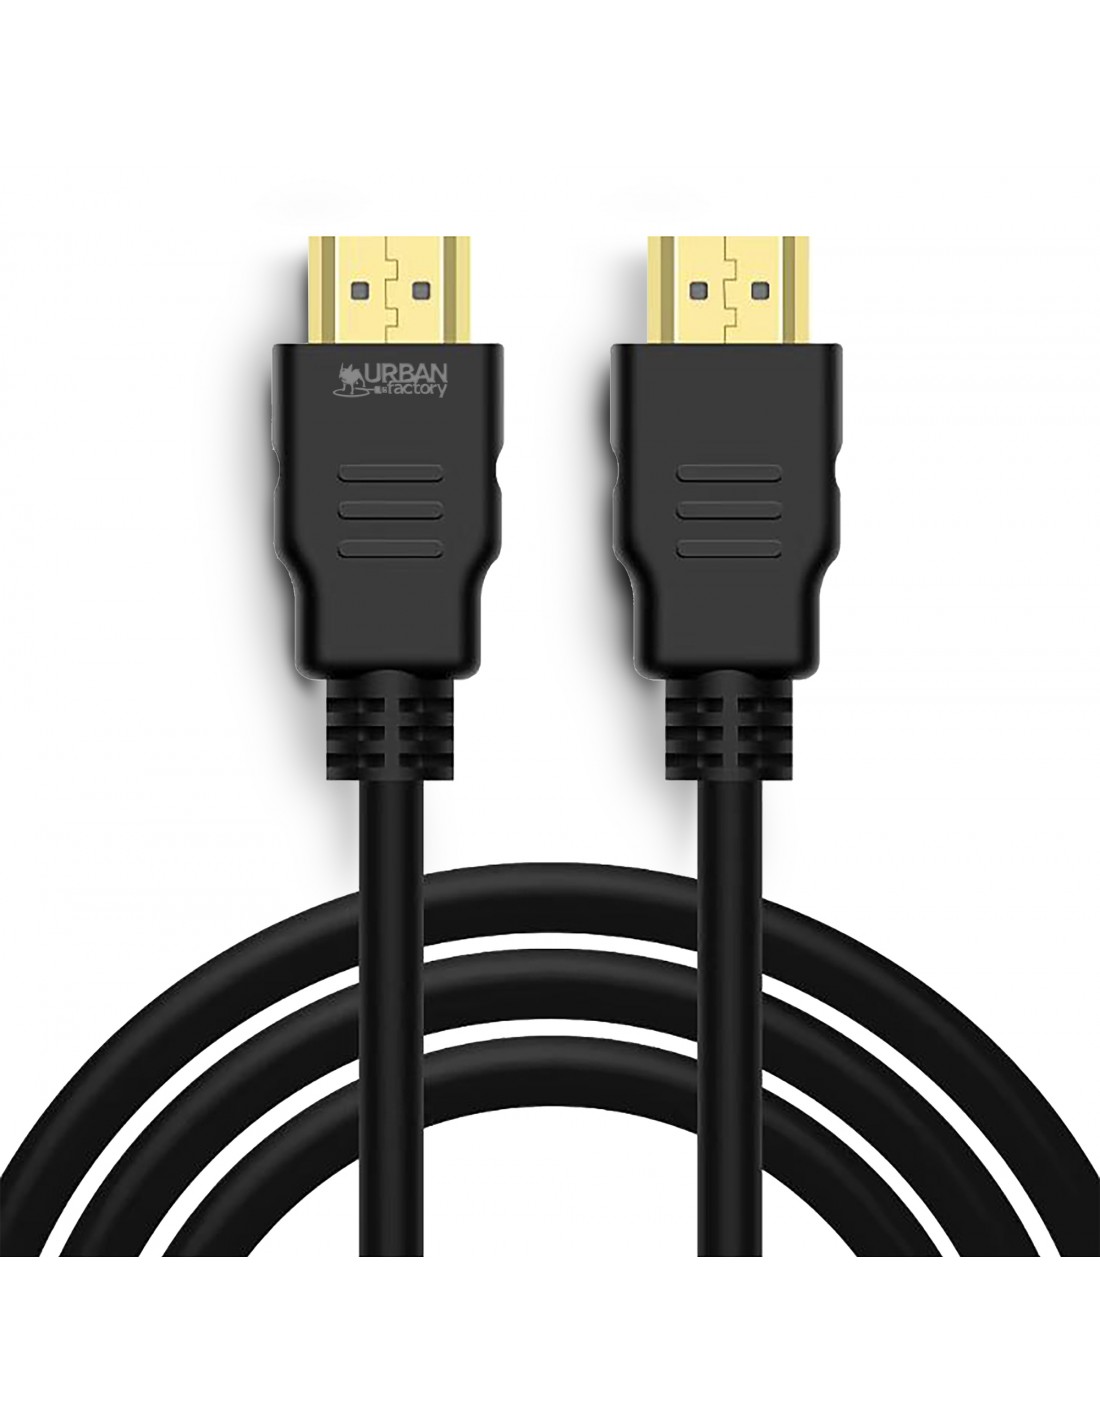 https://urban-factory.com/3903-thickbox_default/basee-cable-hdmi-20-4k.jpg